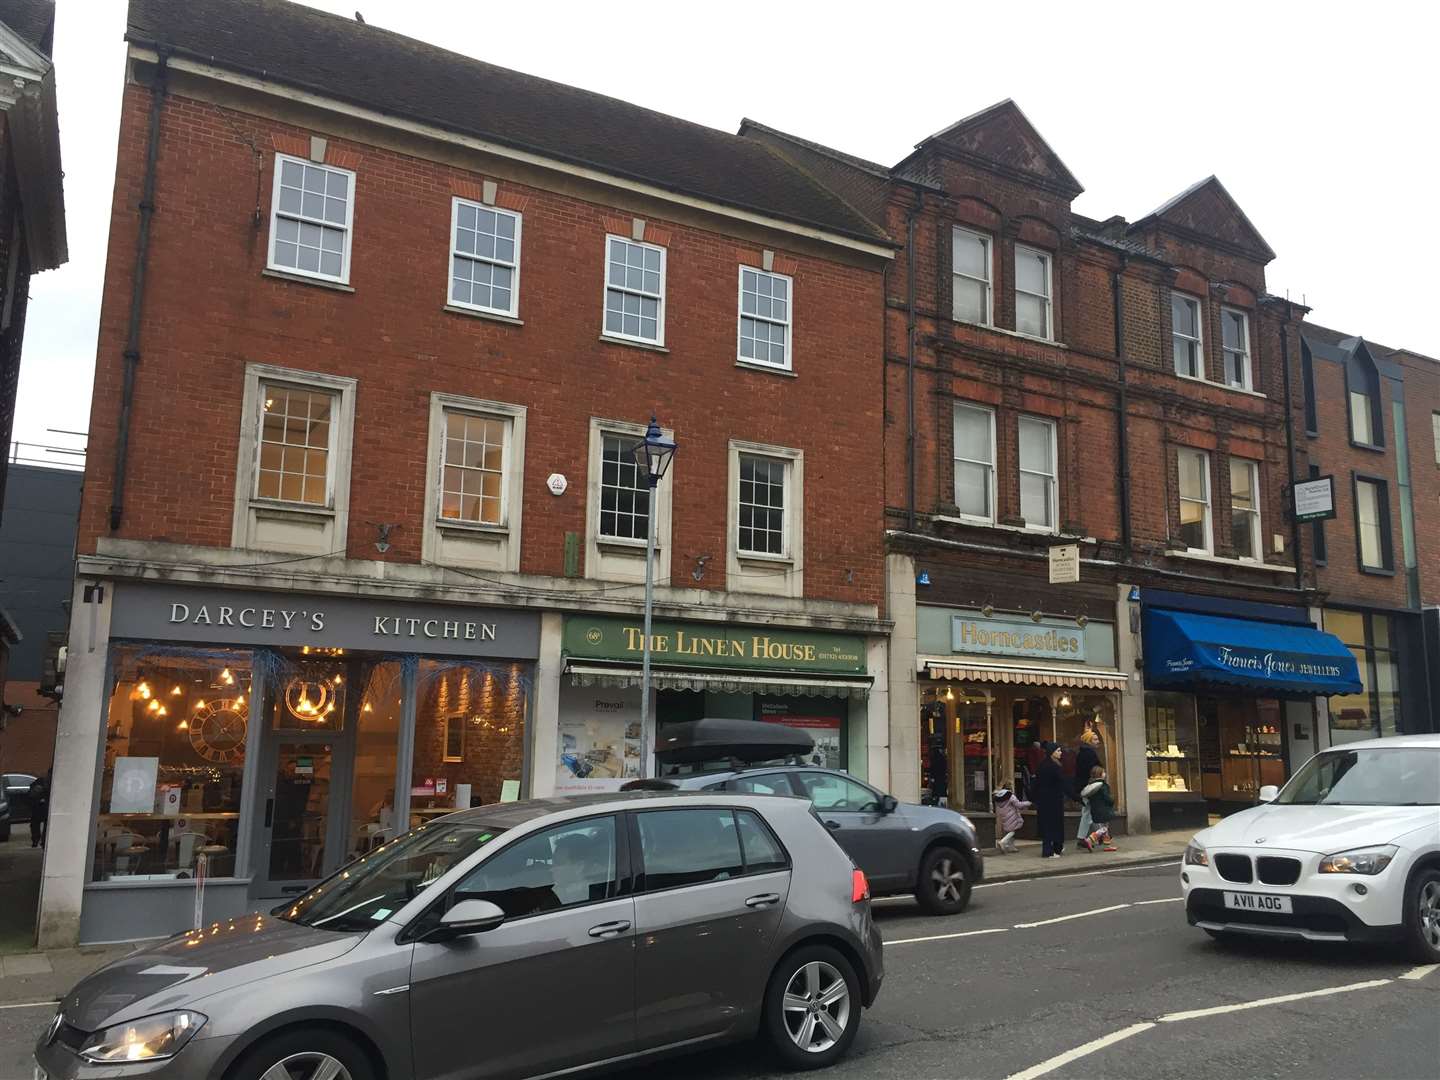 The streets are dotted with independent shops and cafes among chain branches